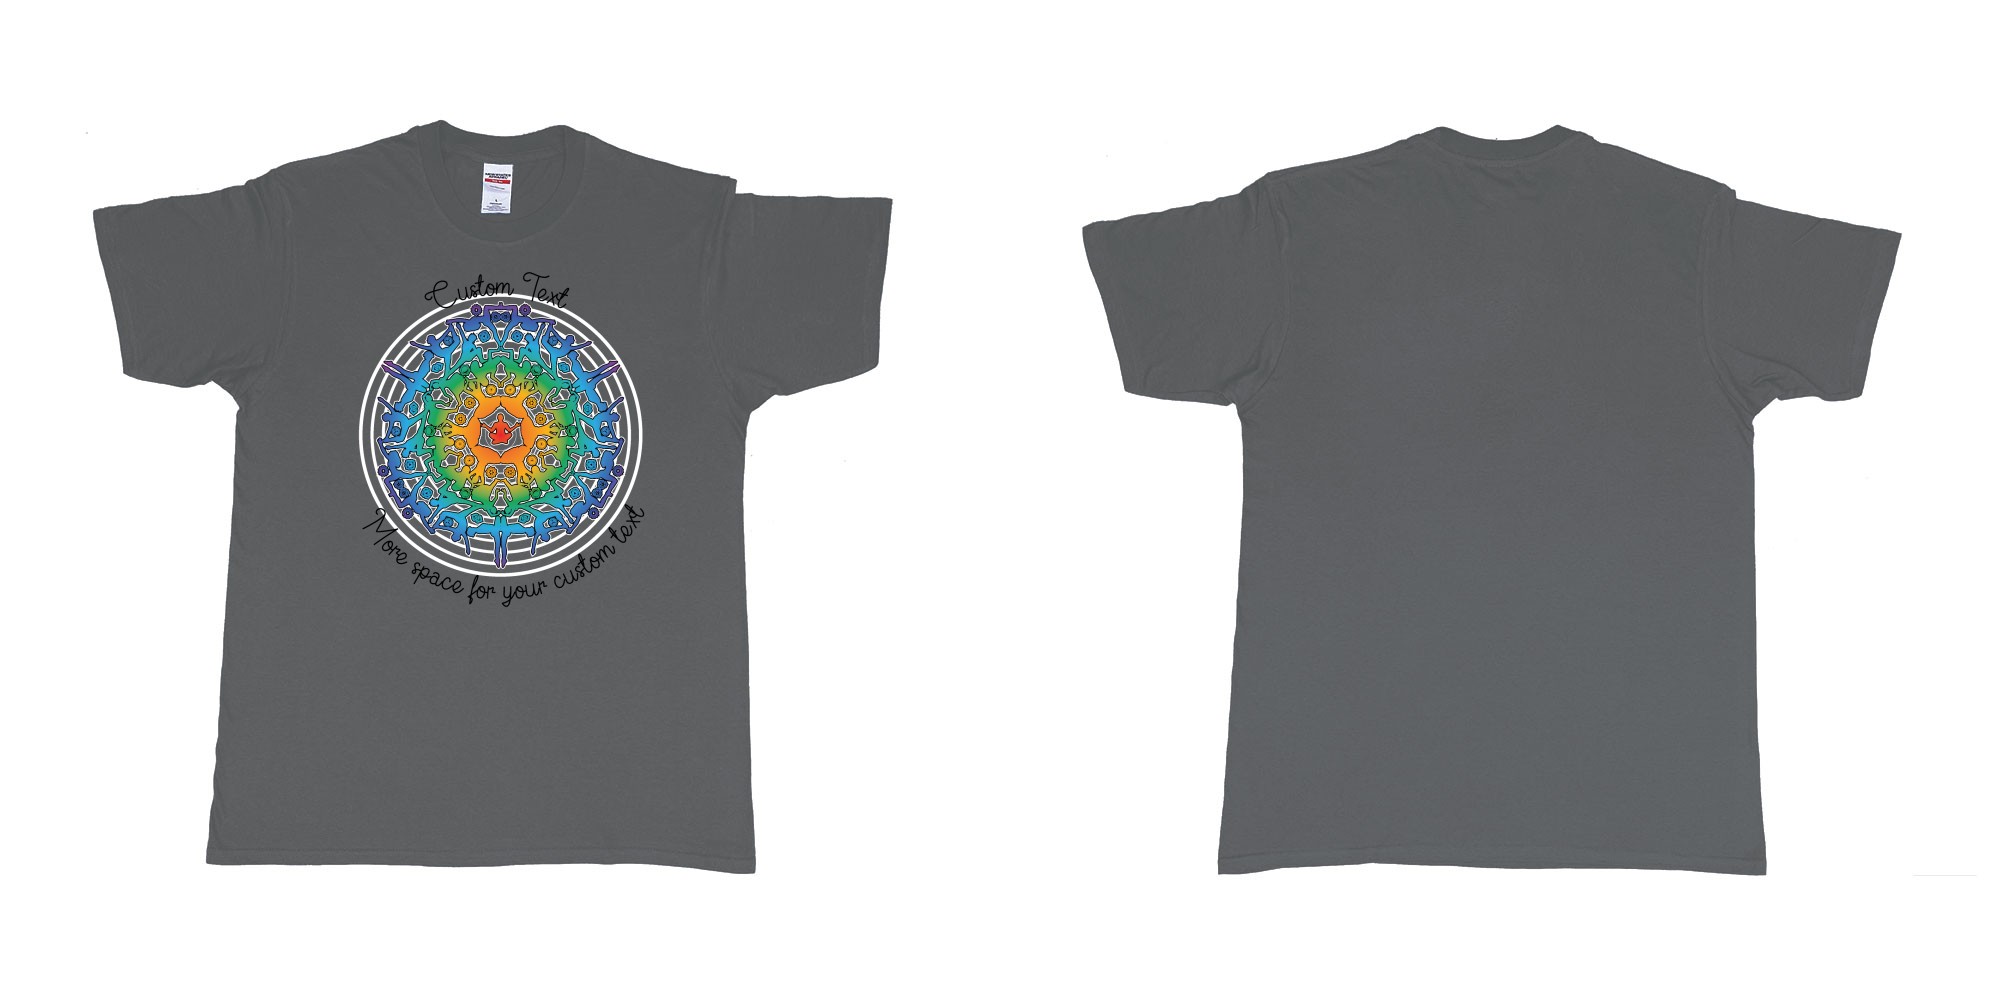 Custom tshirt design yoga mandala in fabric color charcoal choice your own text made in Bali by The Pirate Way